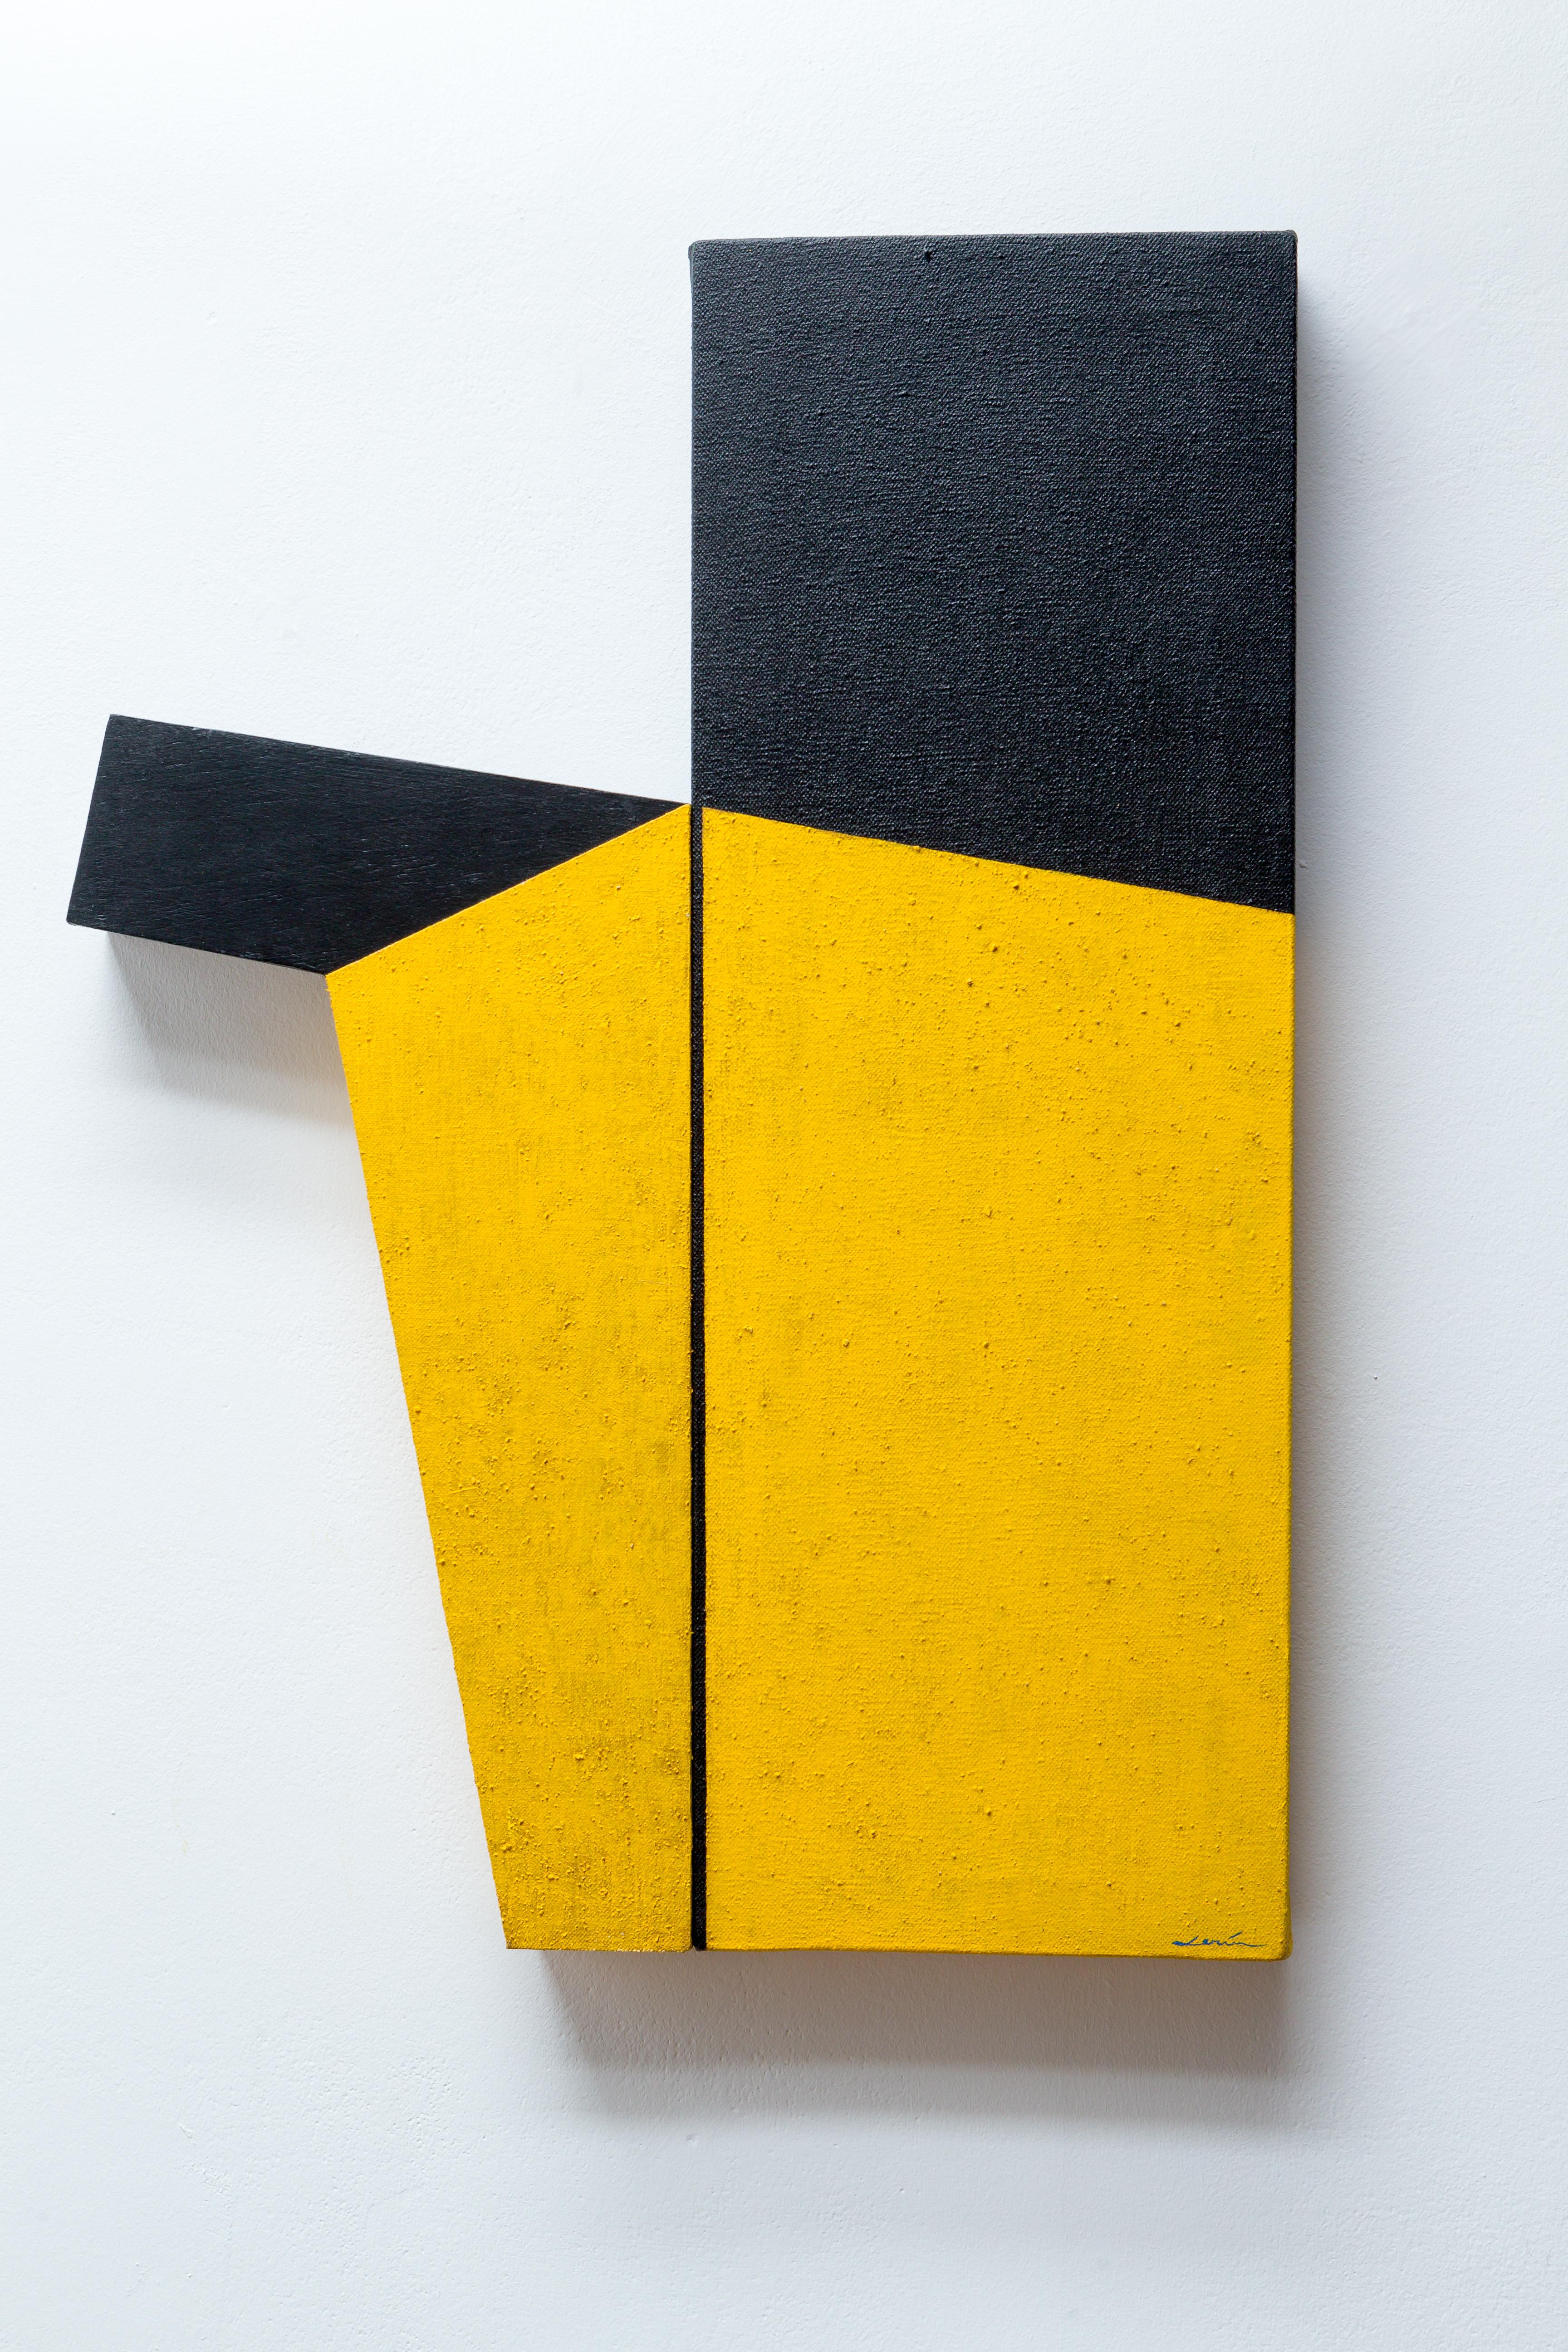 Detour (Series Irregulars II), 2012, Mixed media on canvas on wood, 21 7/10 × 15 3/5 in; 55 × 39.5 cm by Silvia Lerin

These constructed paintings (sold separately) in Red, Magenta, Grey and Yellow, are from a series that considers the interplay